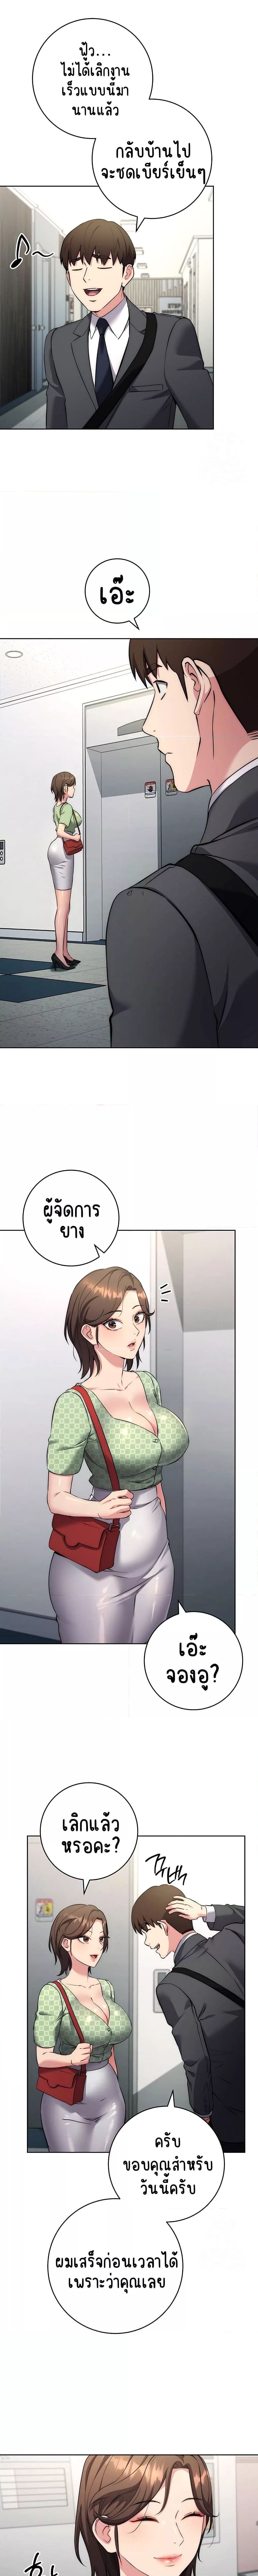 Outsider: The Invisible Man ตอนที่ 7 ภาพ 11